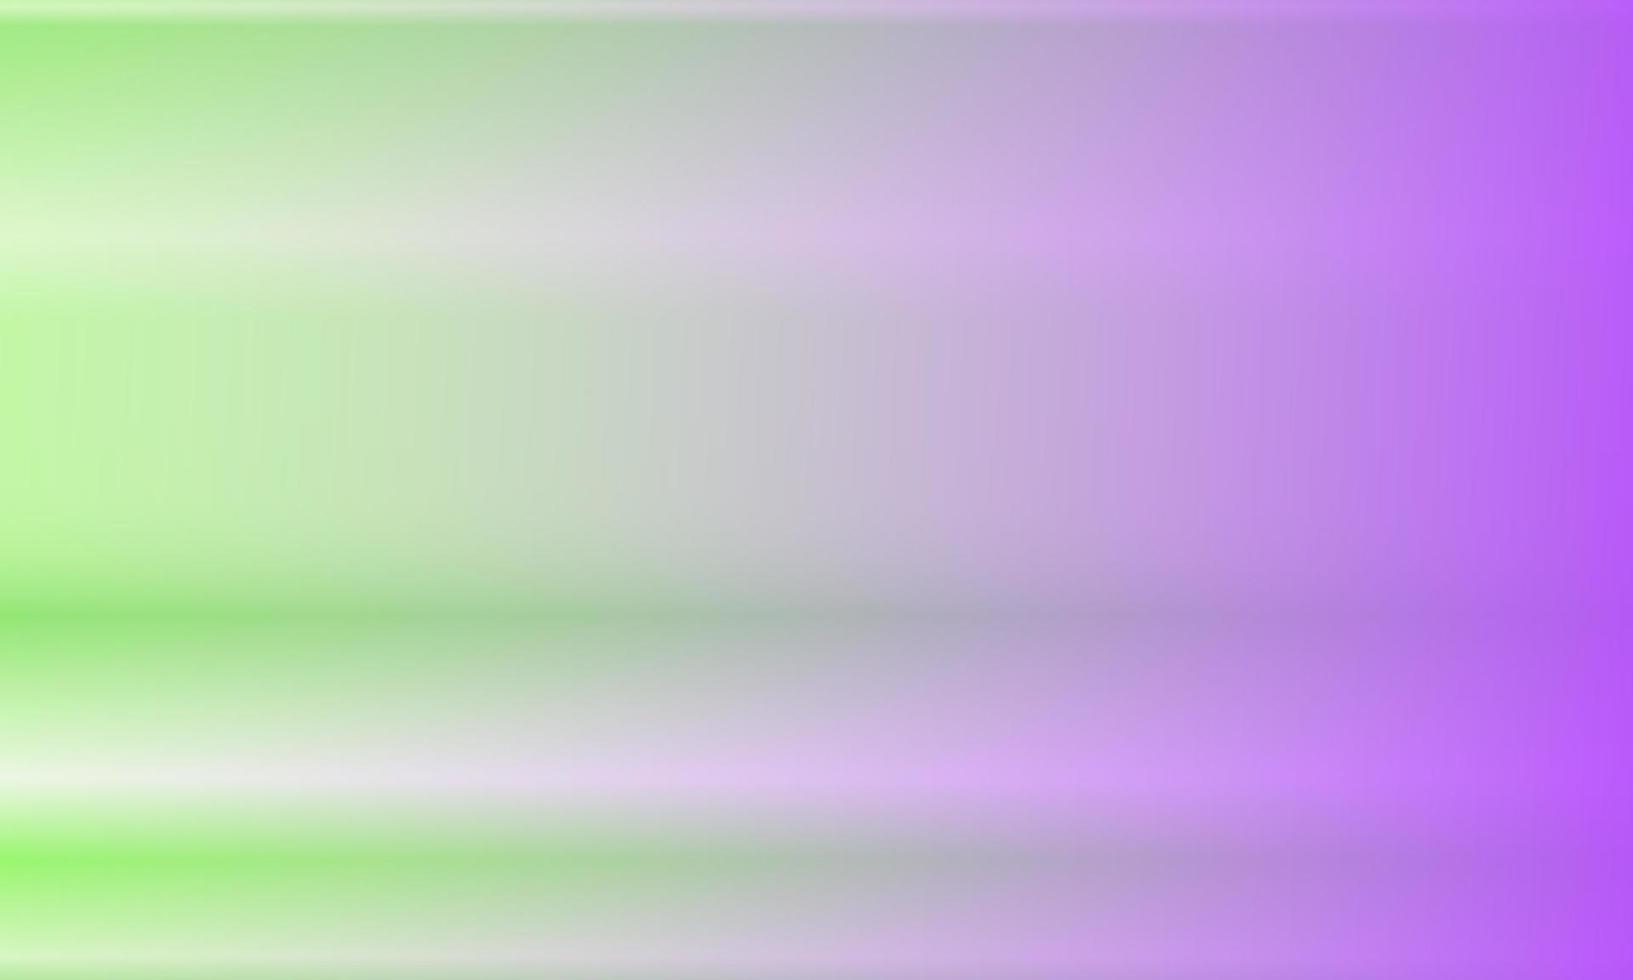 green and purple gradient abstract background with horizontal shining. suitable for wallpaper, banner or flyer vector